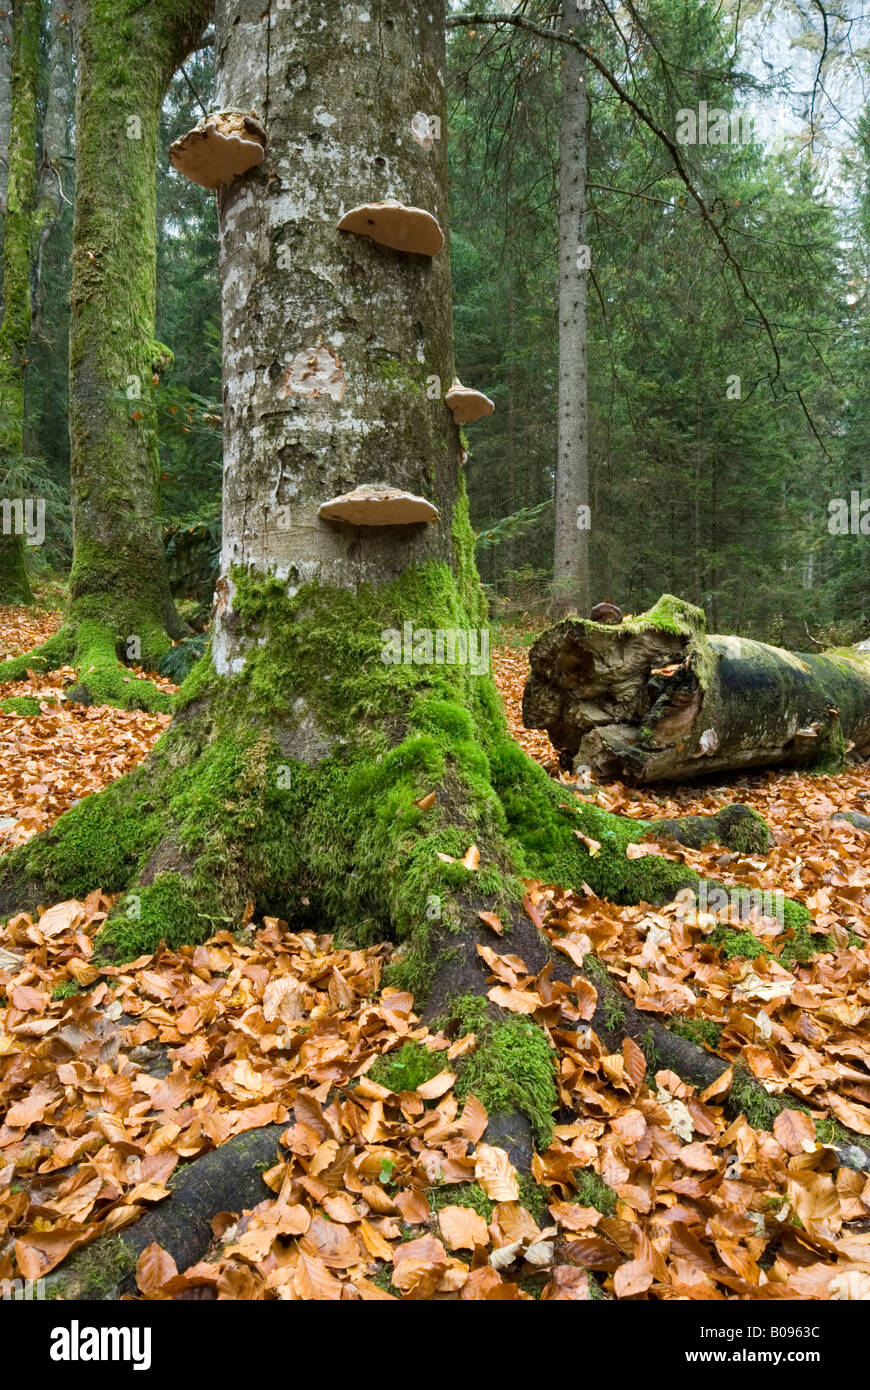 Bracket fungus, tree trunks and autumn leaves on the forest floor, Wimbachgries, Berchtesgaden National Park, Bavaria, Germany Stock Photo